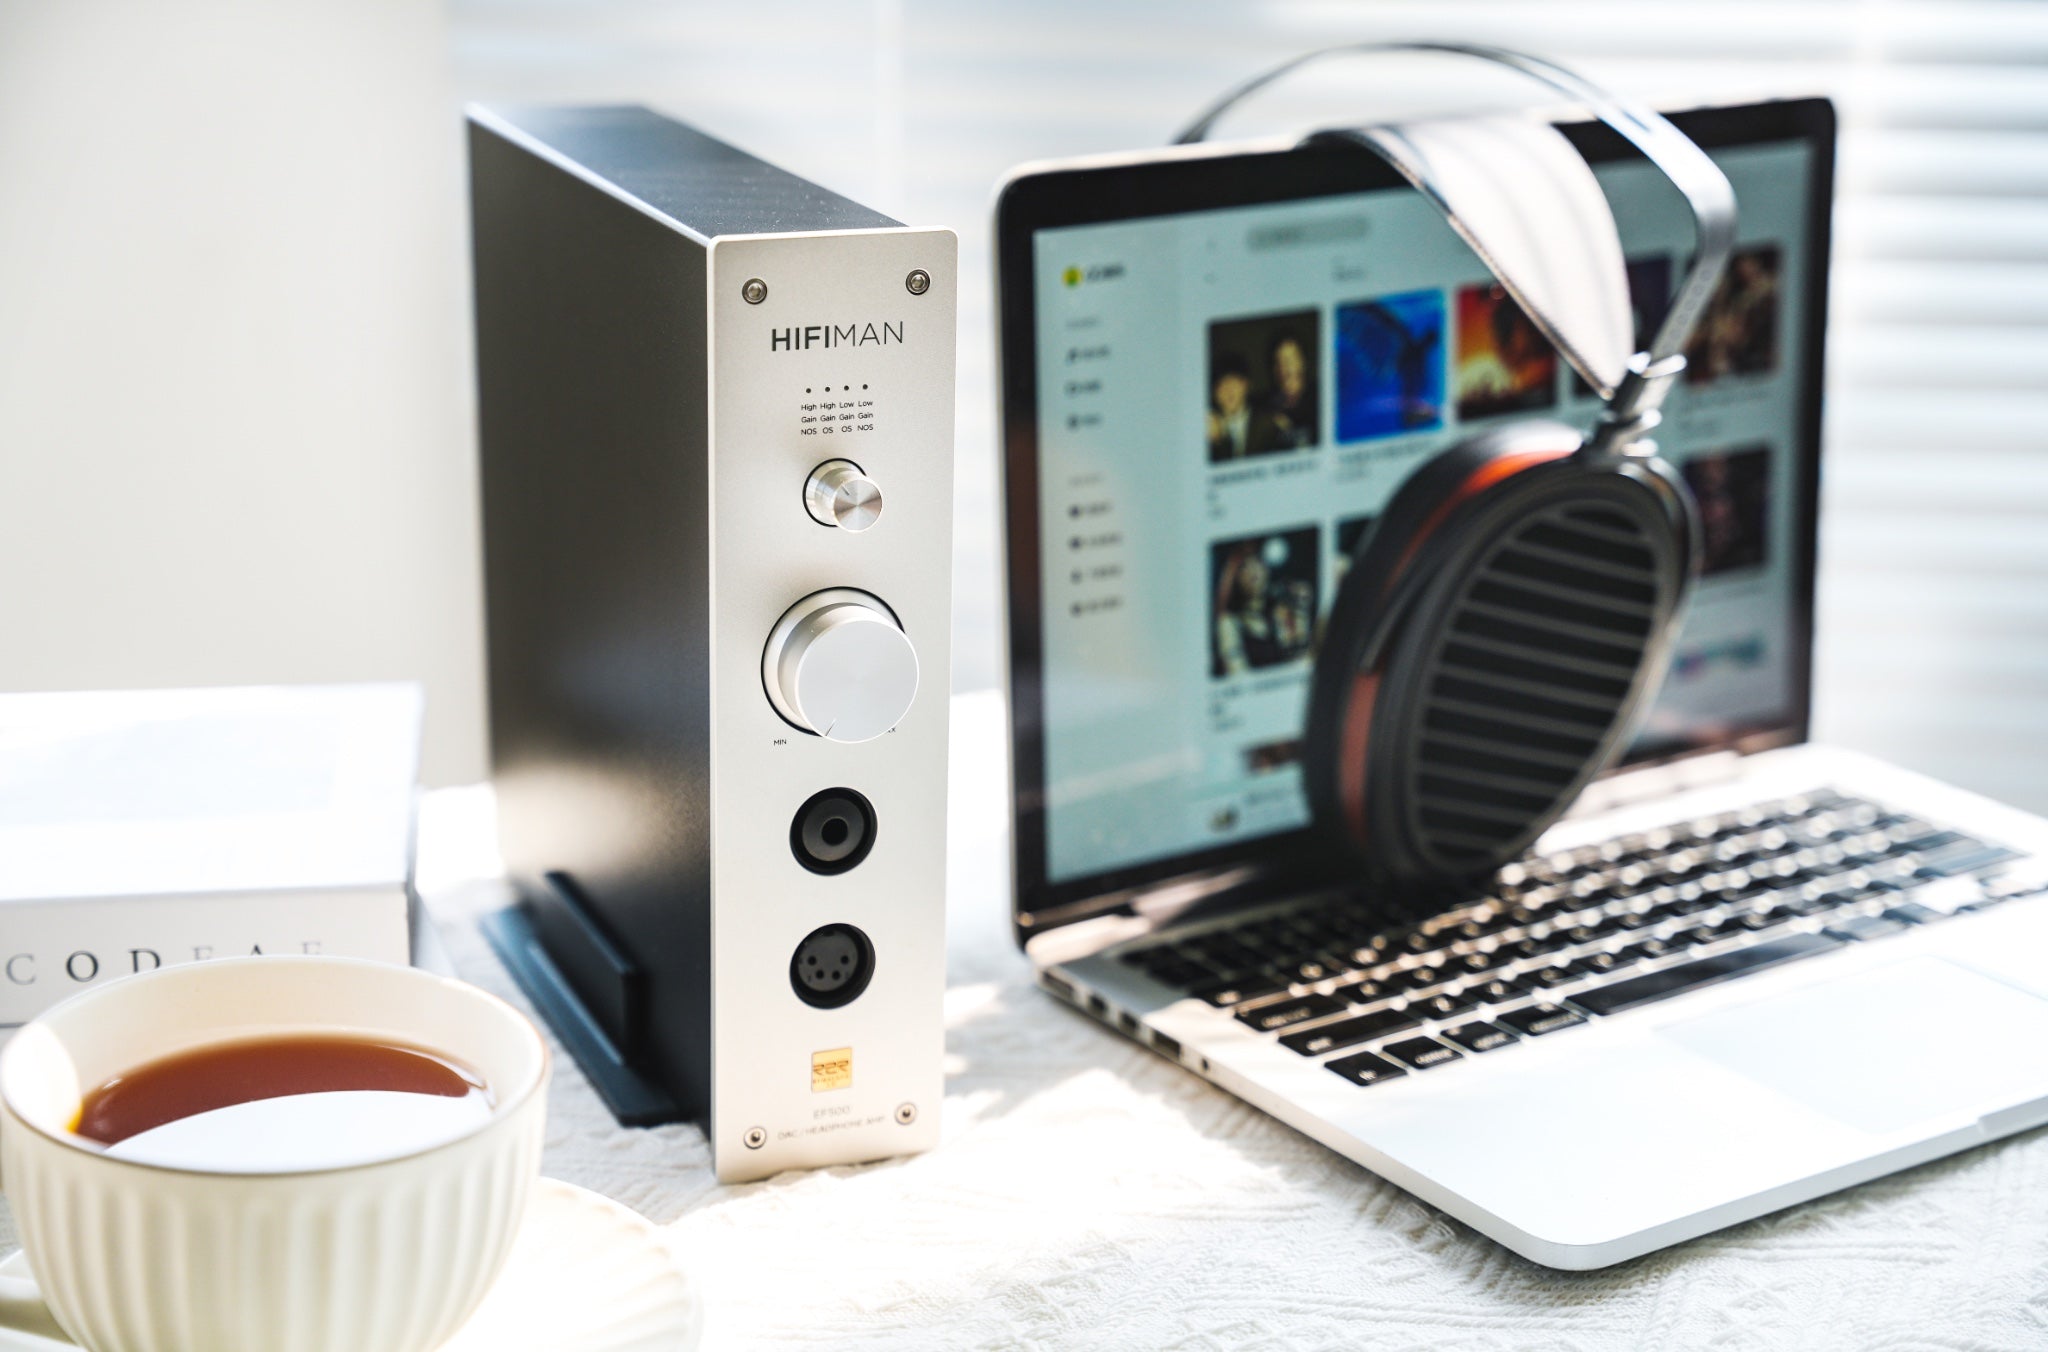 HiFiMAN EF500 DAC front left quarter with Macbook, Arya headphones, and cup of coffee